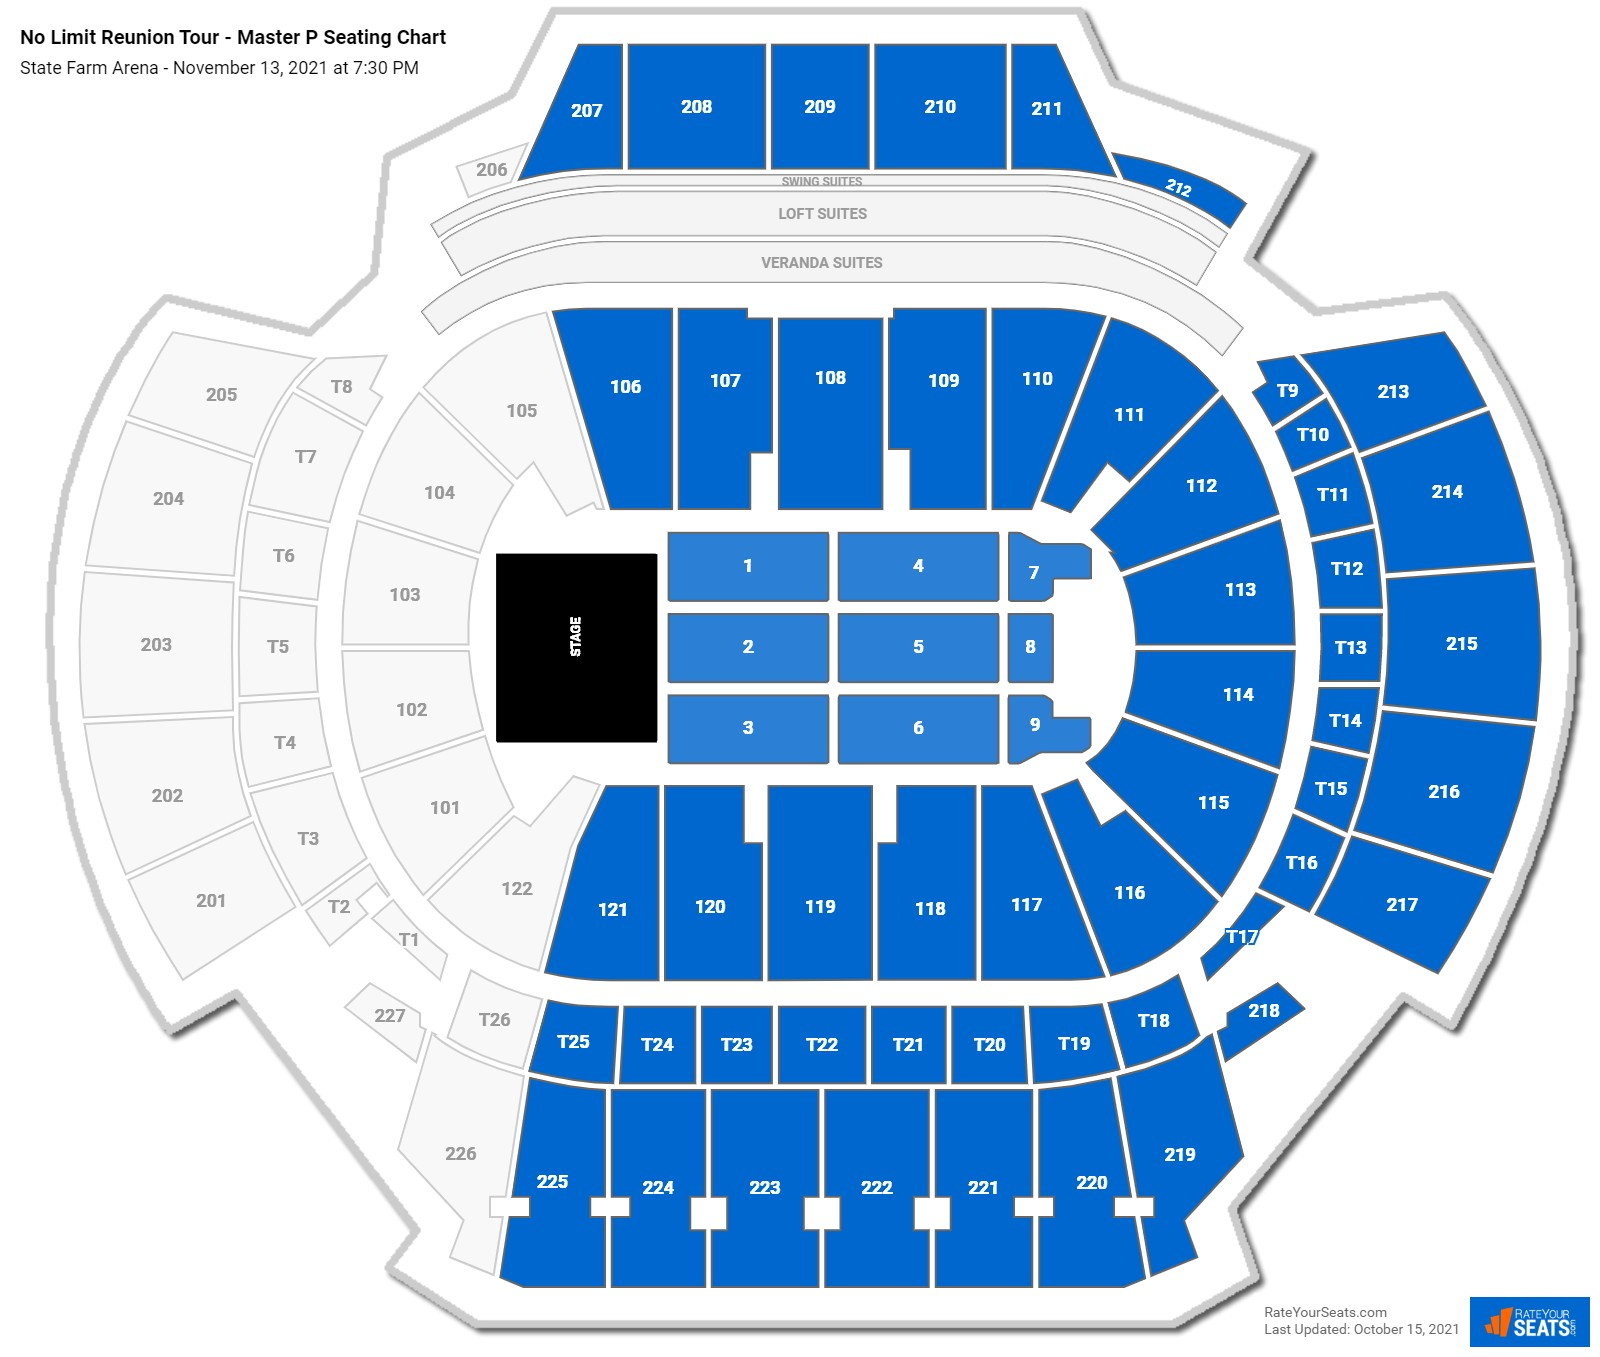 State Farm Arena Seating Charts For Concerts RateYourSeats